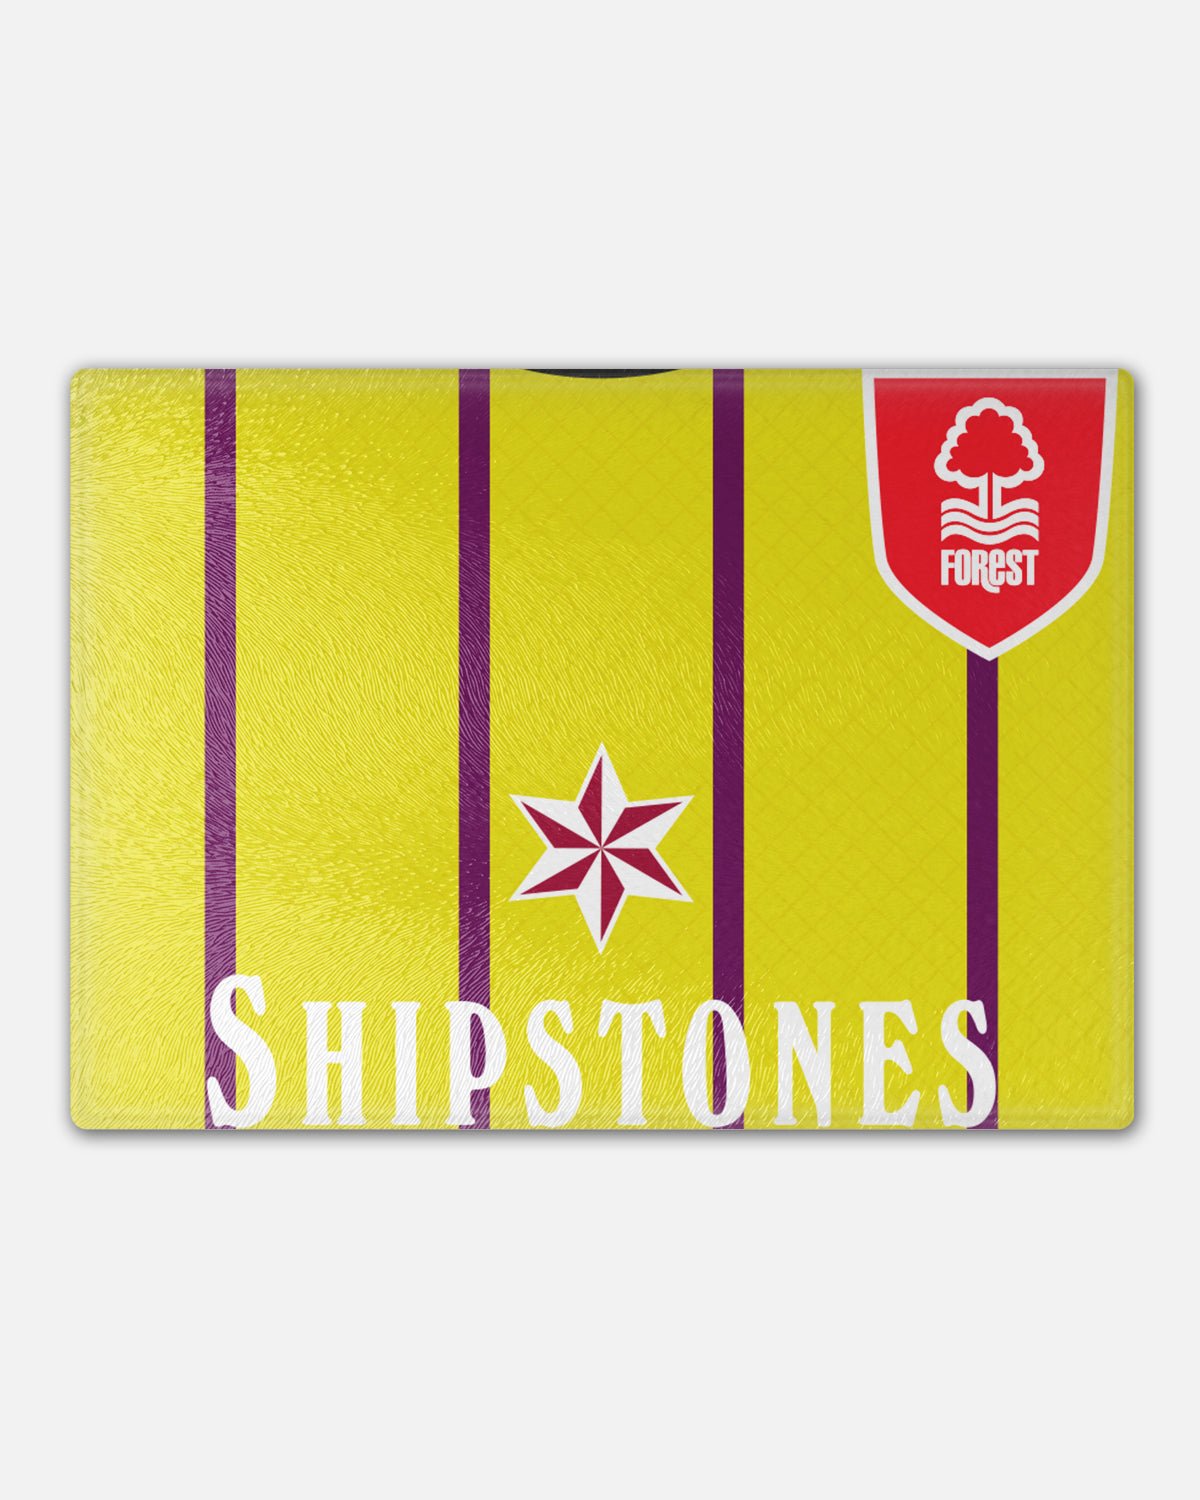 NFFC 1991 Keeper Chopping Board - Nottingham Forest FC